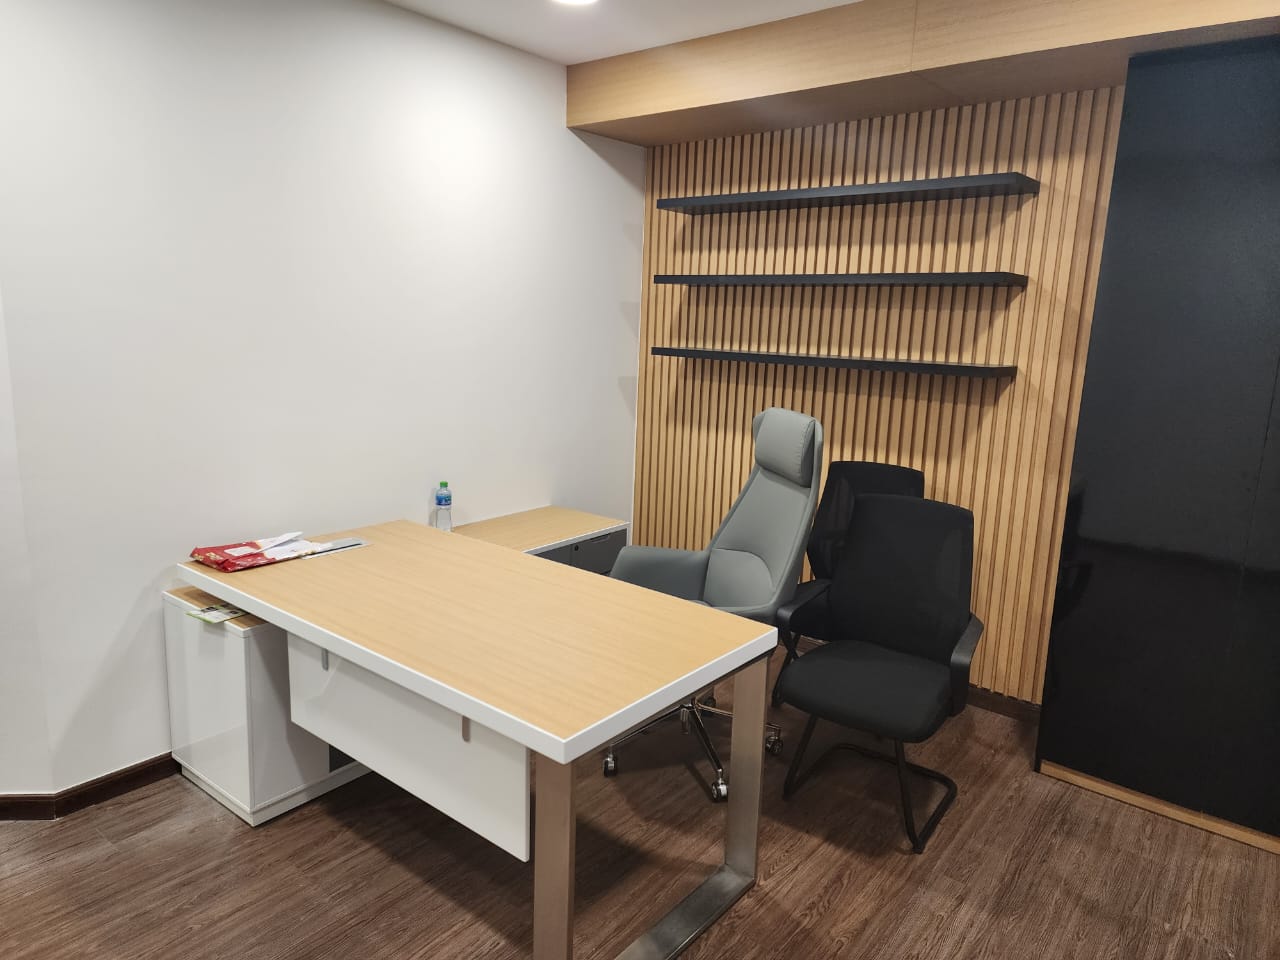 Modern office interior: Open-plan layout, white walls, exposed brickwork, dark wood flooring, black ceiling. Sleek gray workstations, ergonomic chairs, comfy sofas, greenery. Bright, inviting atmosphere. Stylish black-and-white reception counter.